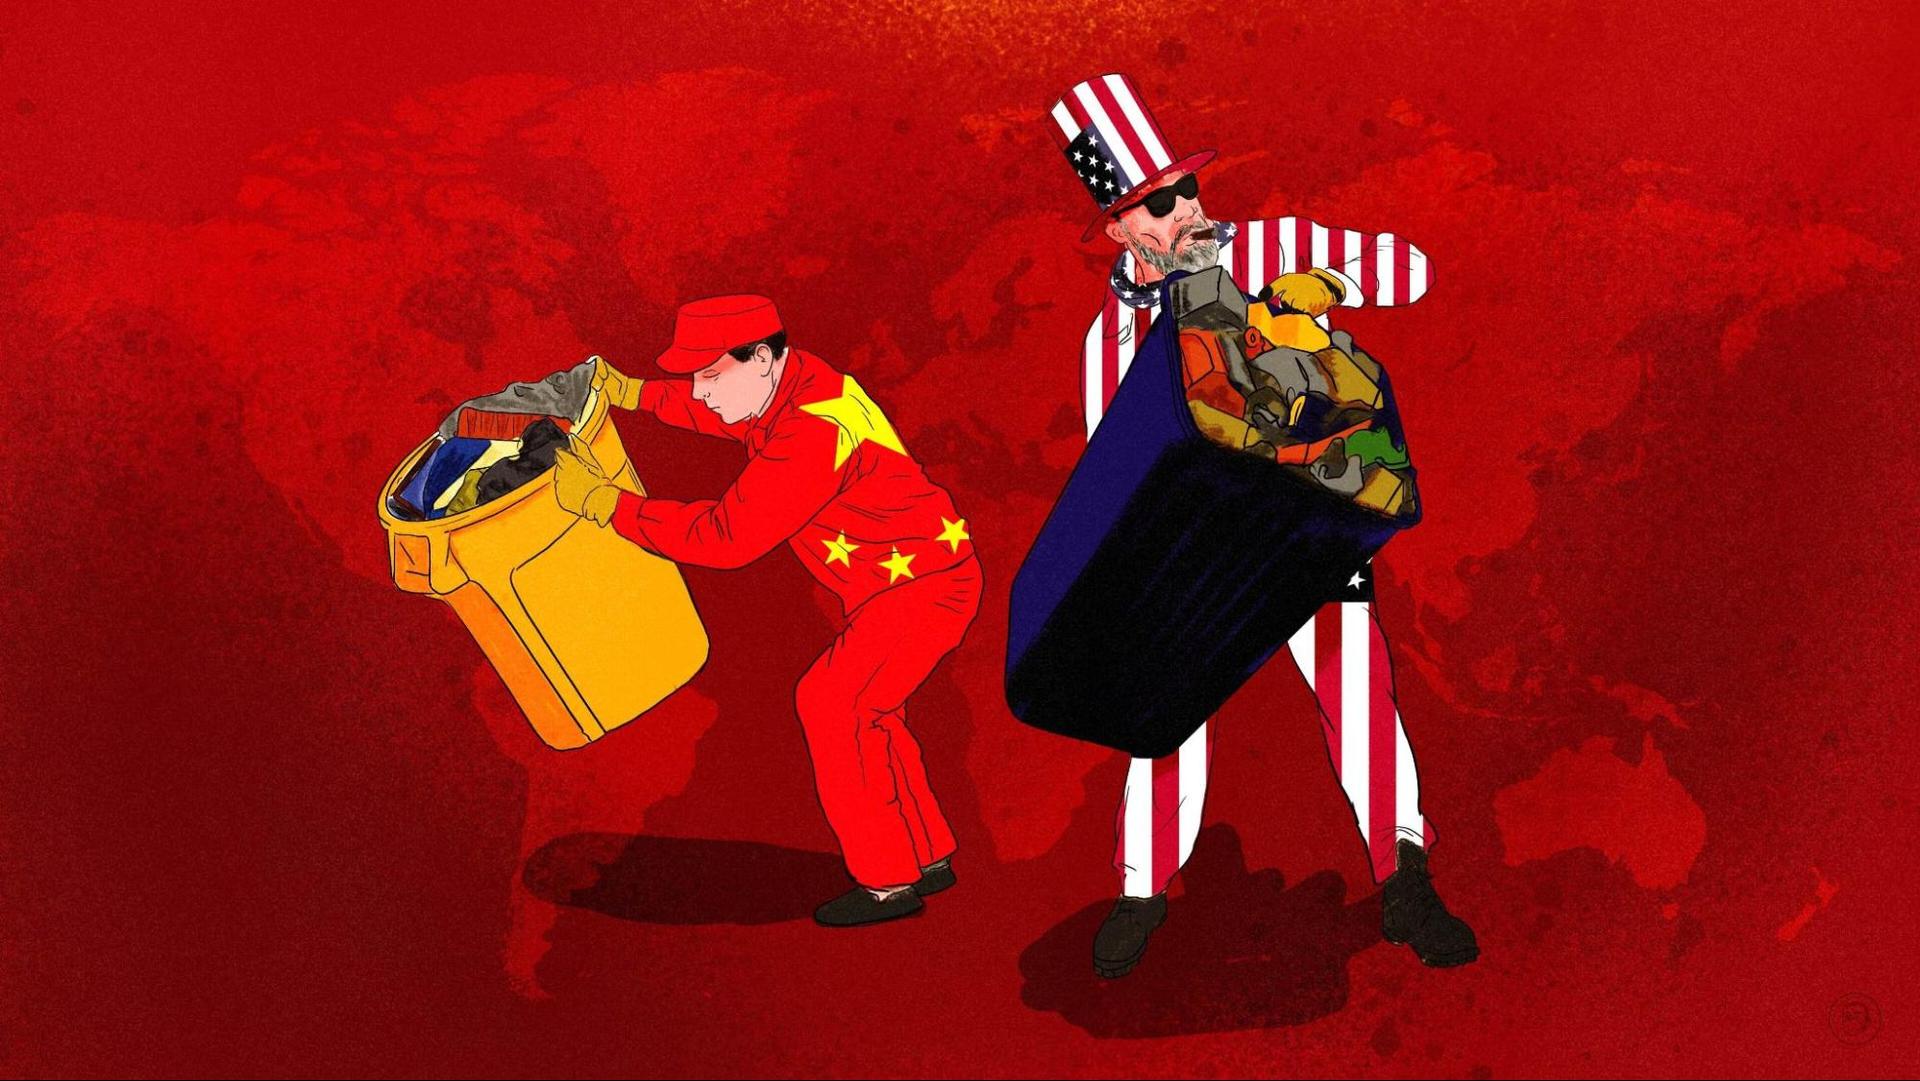 An illustration by Alex Santafe depicting a chinese polititian dumping trash on the U.S. alongside an American polititian dressed like uncle Sam, dumping trash on China